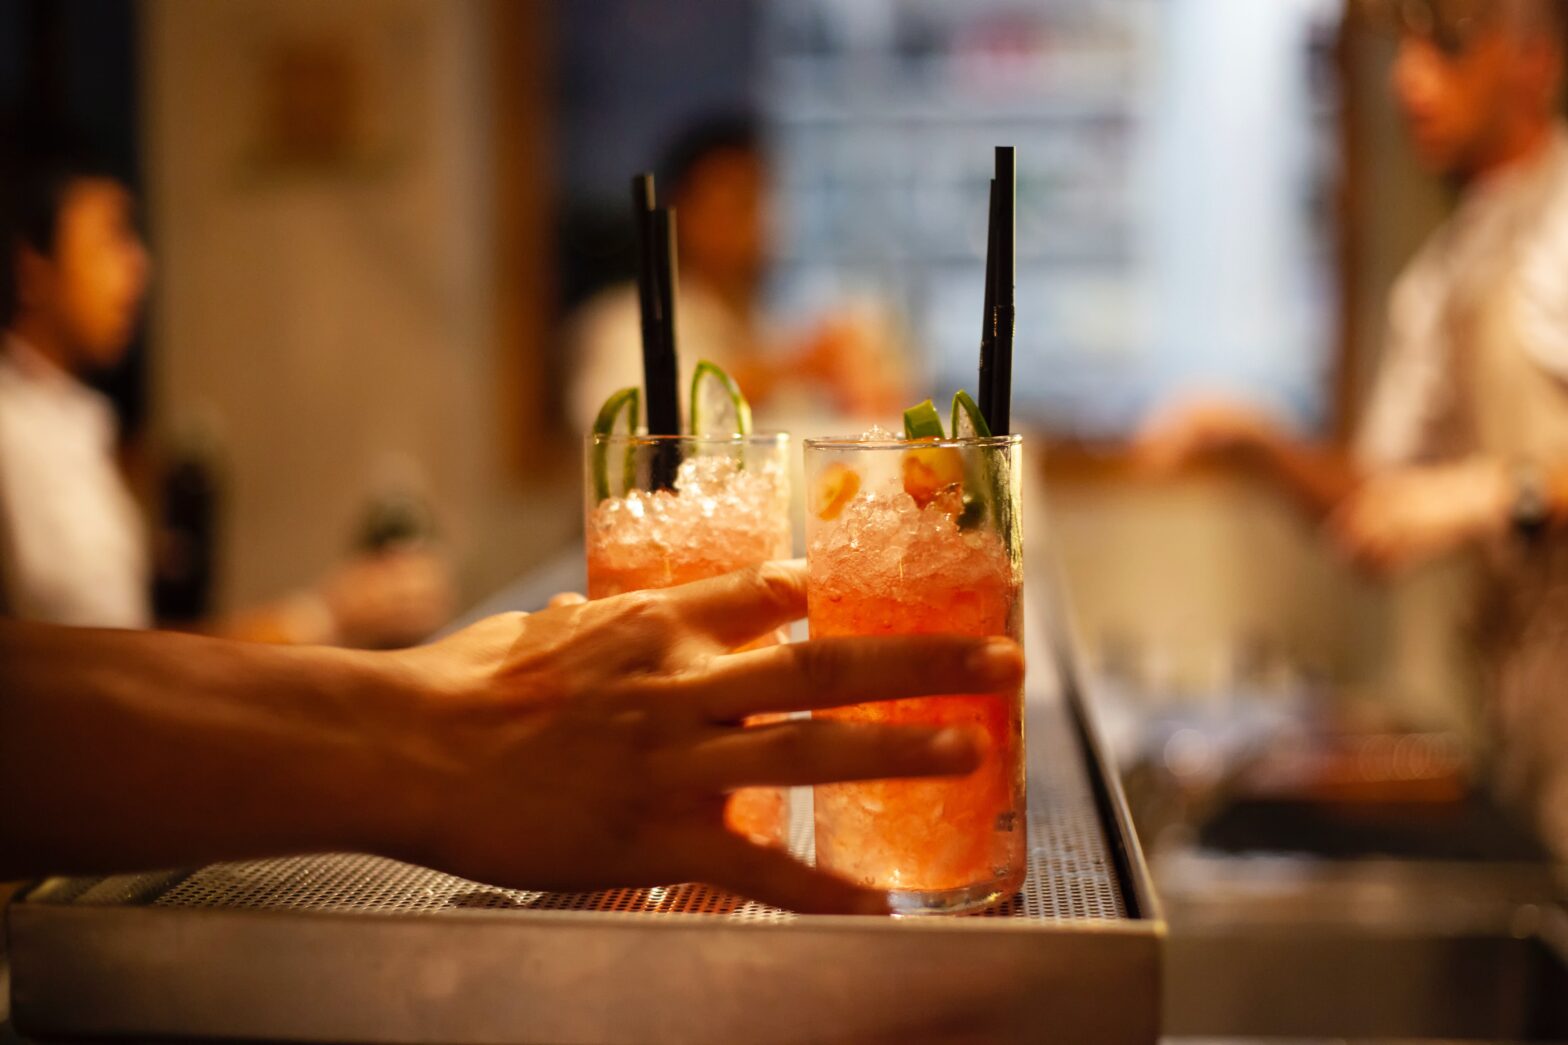 Top-Rated Bars To Visit In The 'Cocktail Capital Of The World'